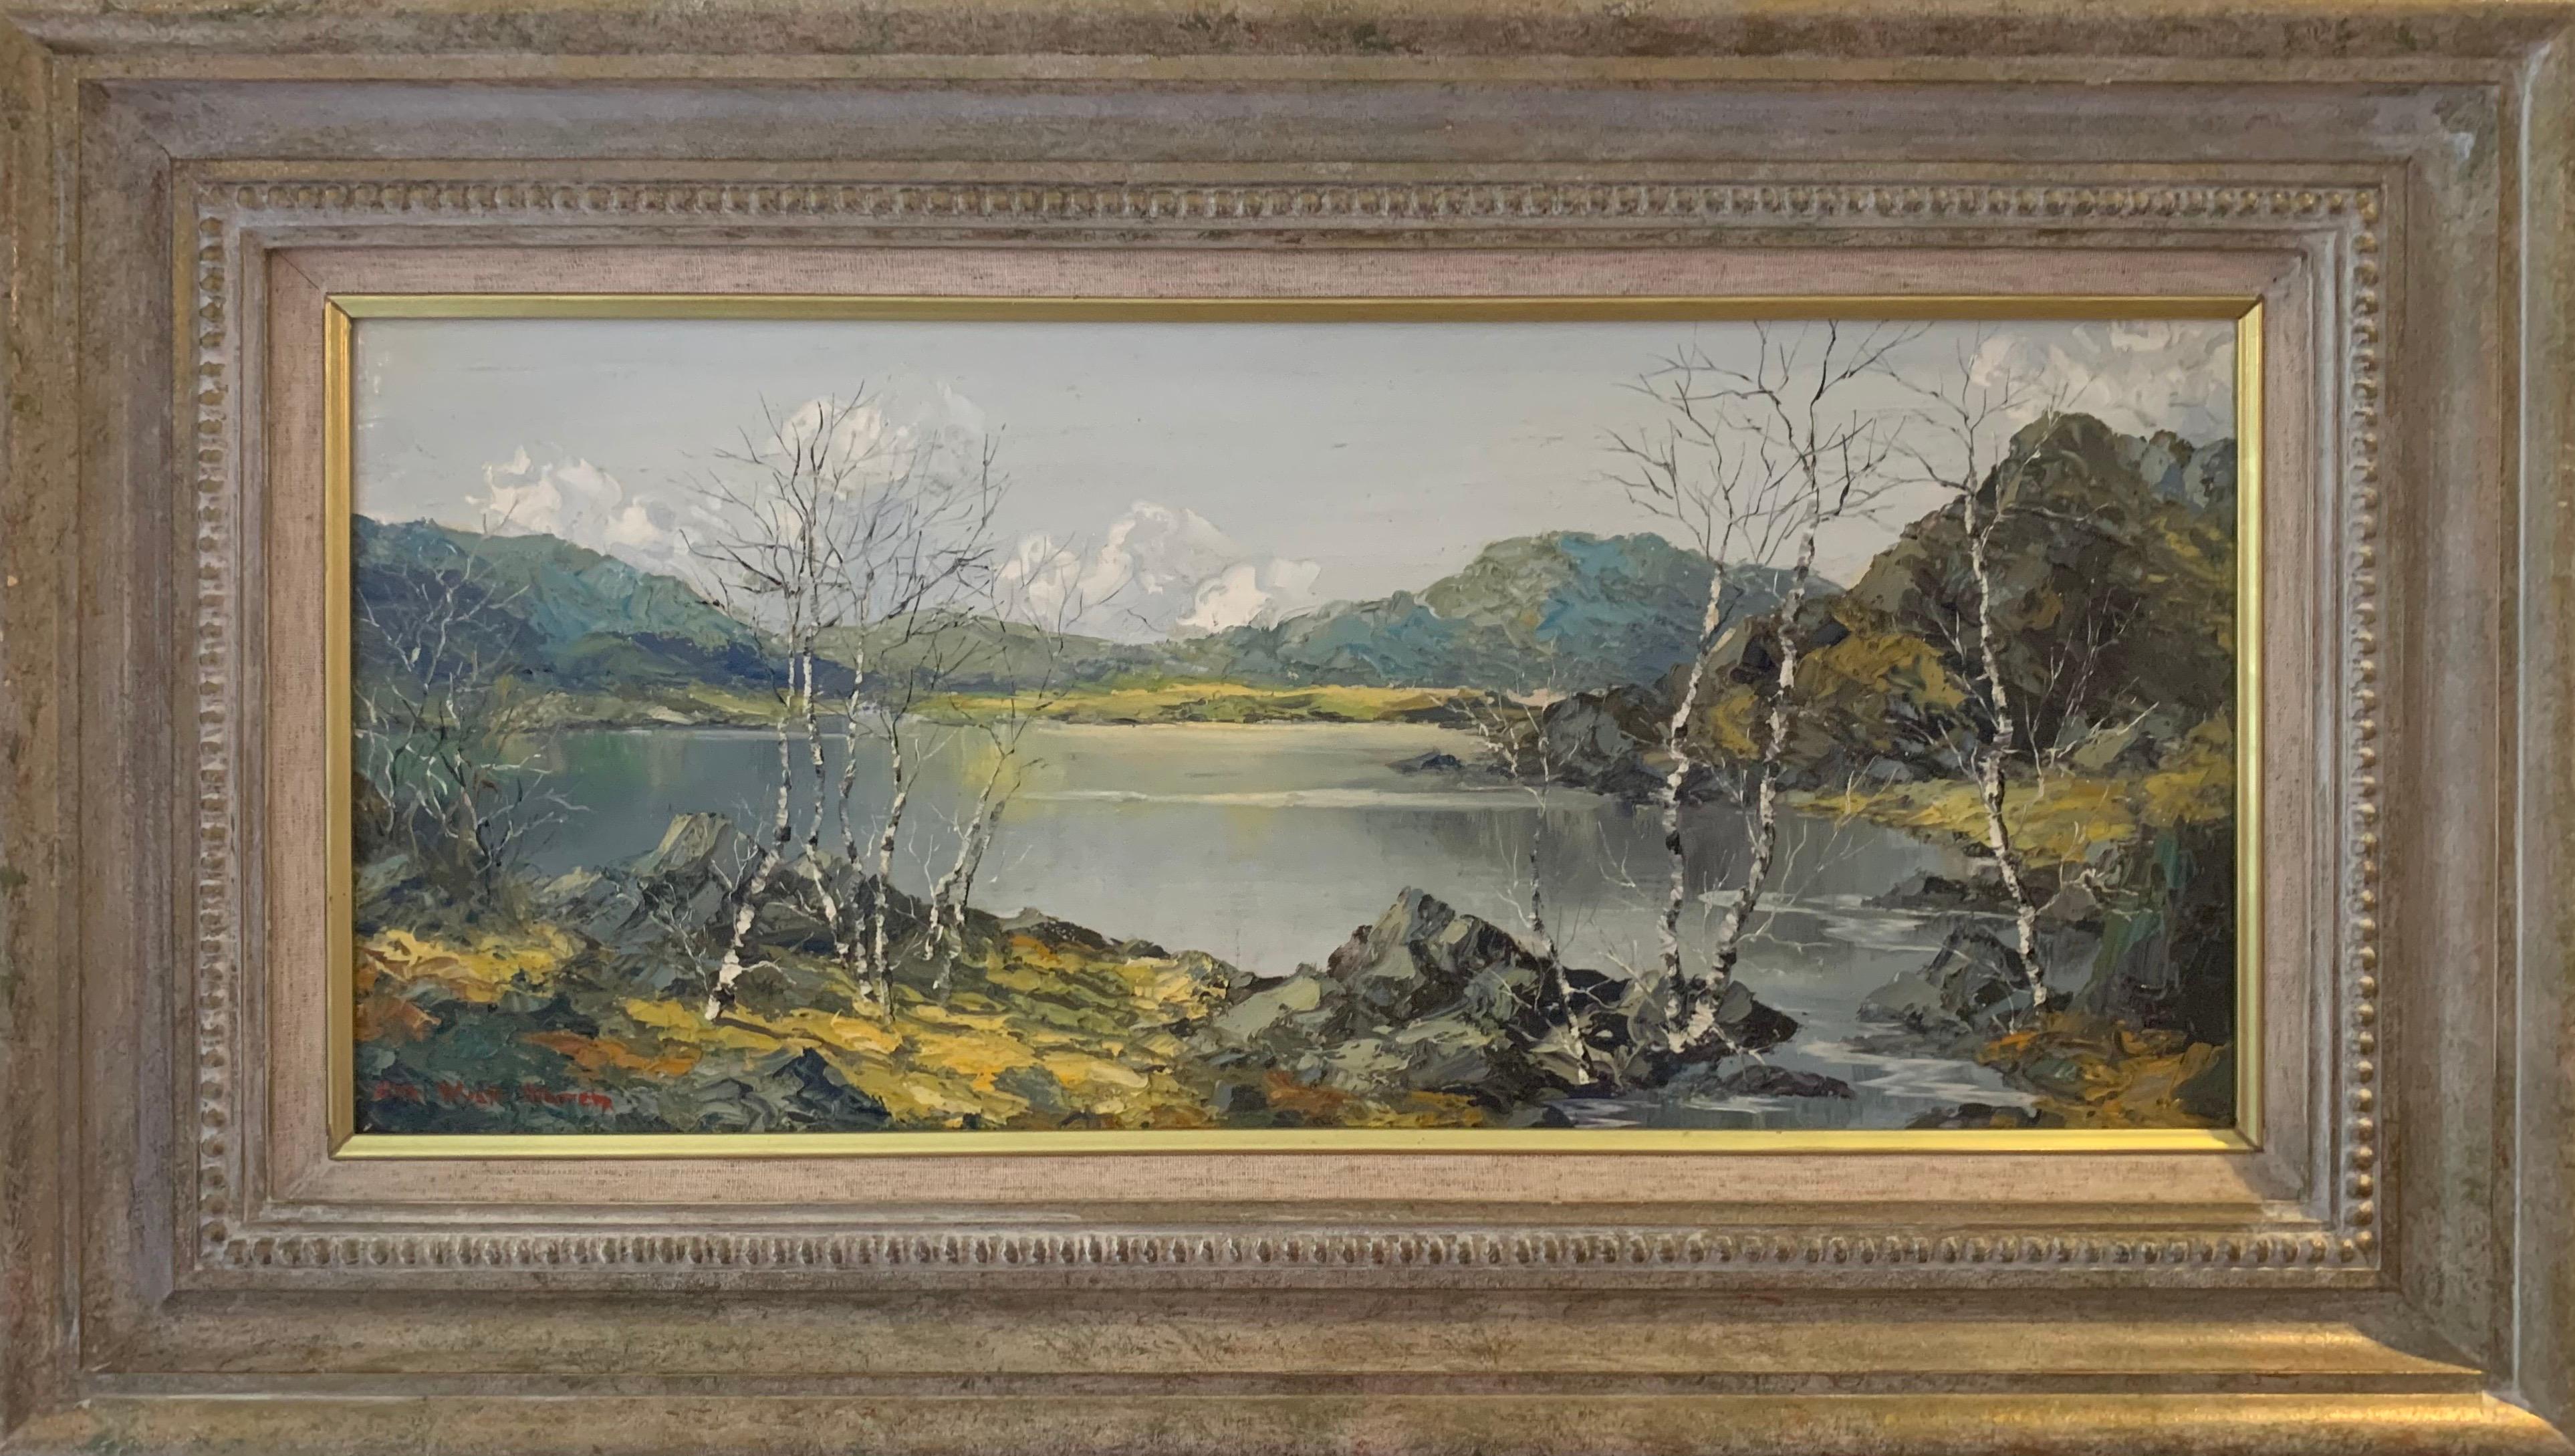 Oil Painting of Snowdon Mountains & Lakes in Wales by Modern British Artist